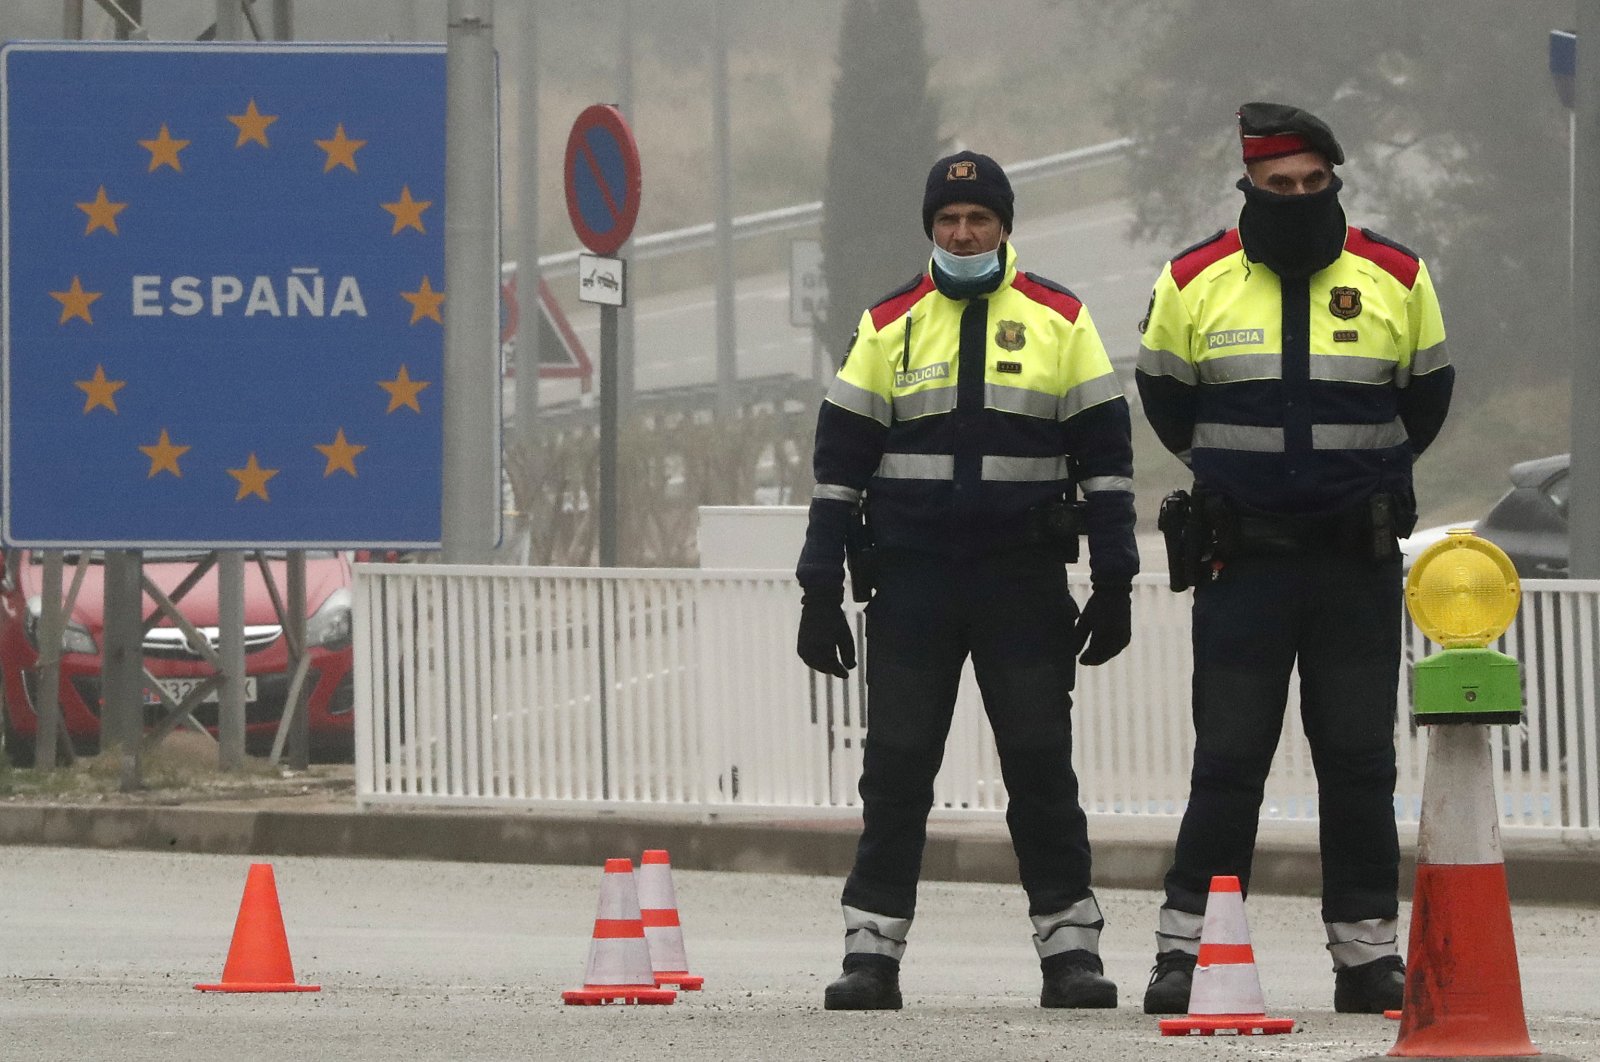 Policemen control the border crossing between Spain and France at Le Perthus, France, March 17, 2020. (EPA Photo)